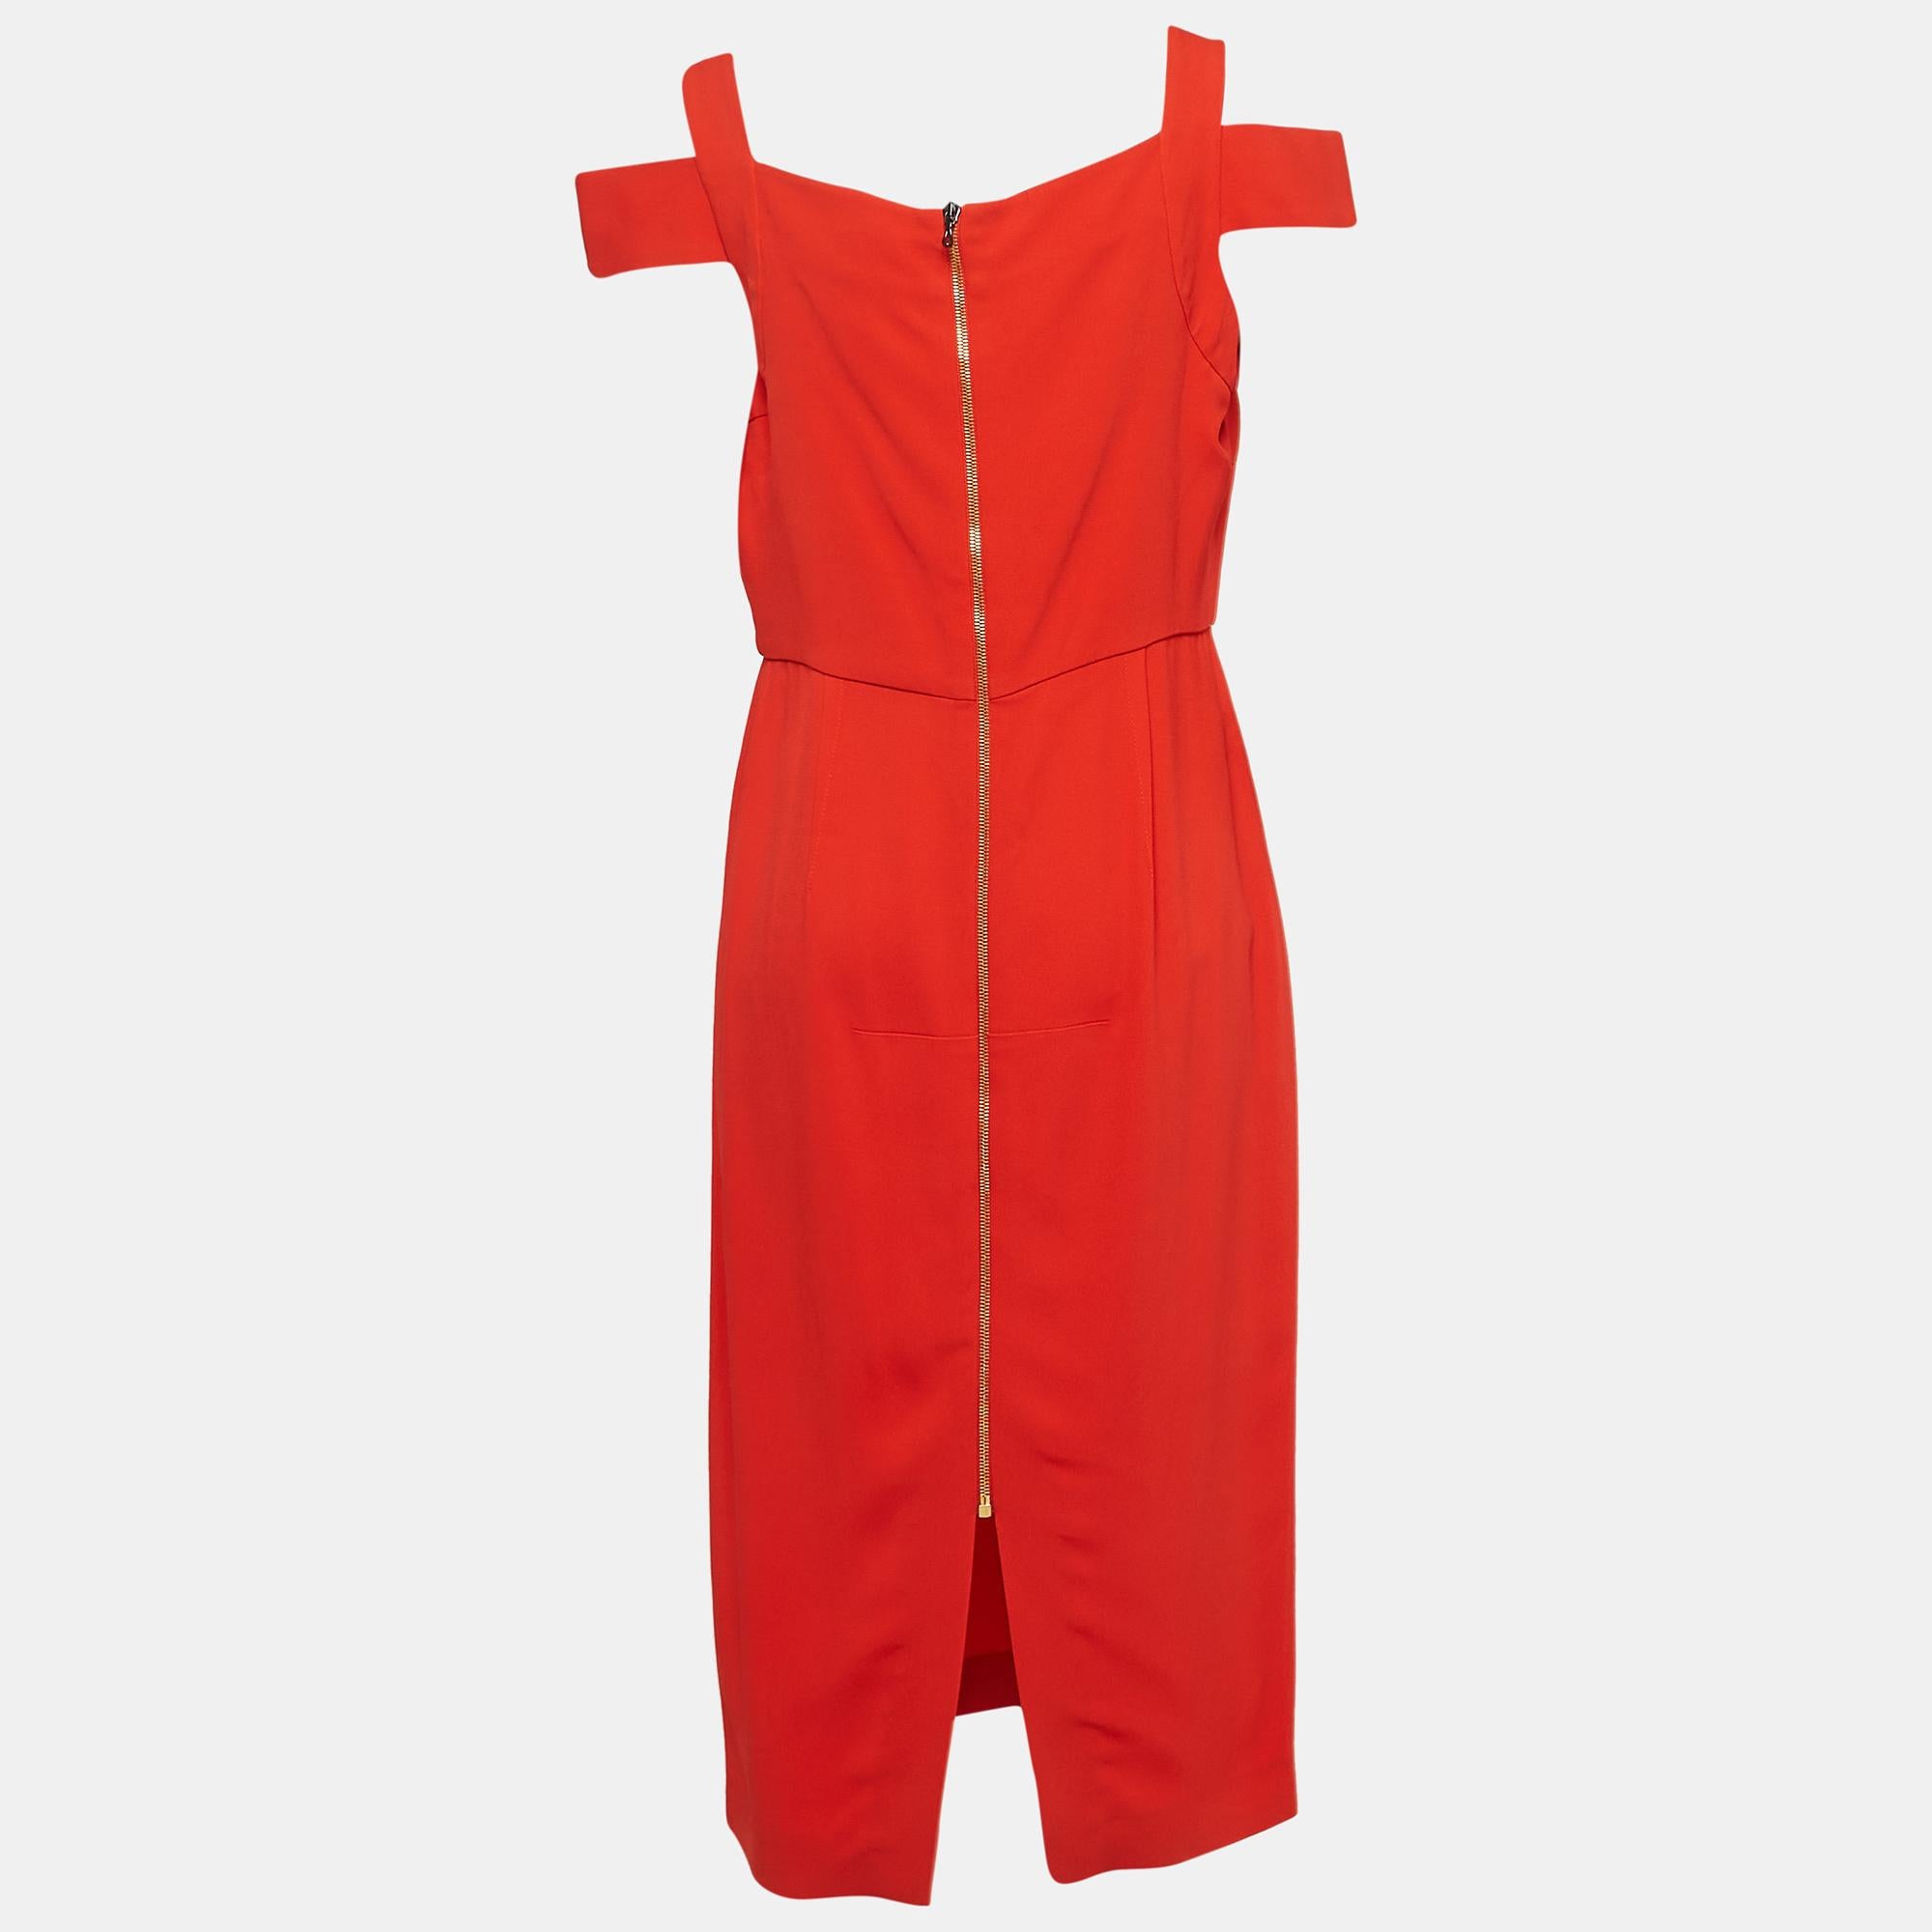 The fine artistry and the feminine silhouette of this Limited Edition by Roland Mouret dress exhibit the label's impeccable craftsmanship in tailoring. It is stitched using quality materials, has a good fit, and can be easily styled with chic